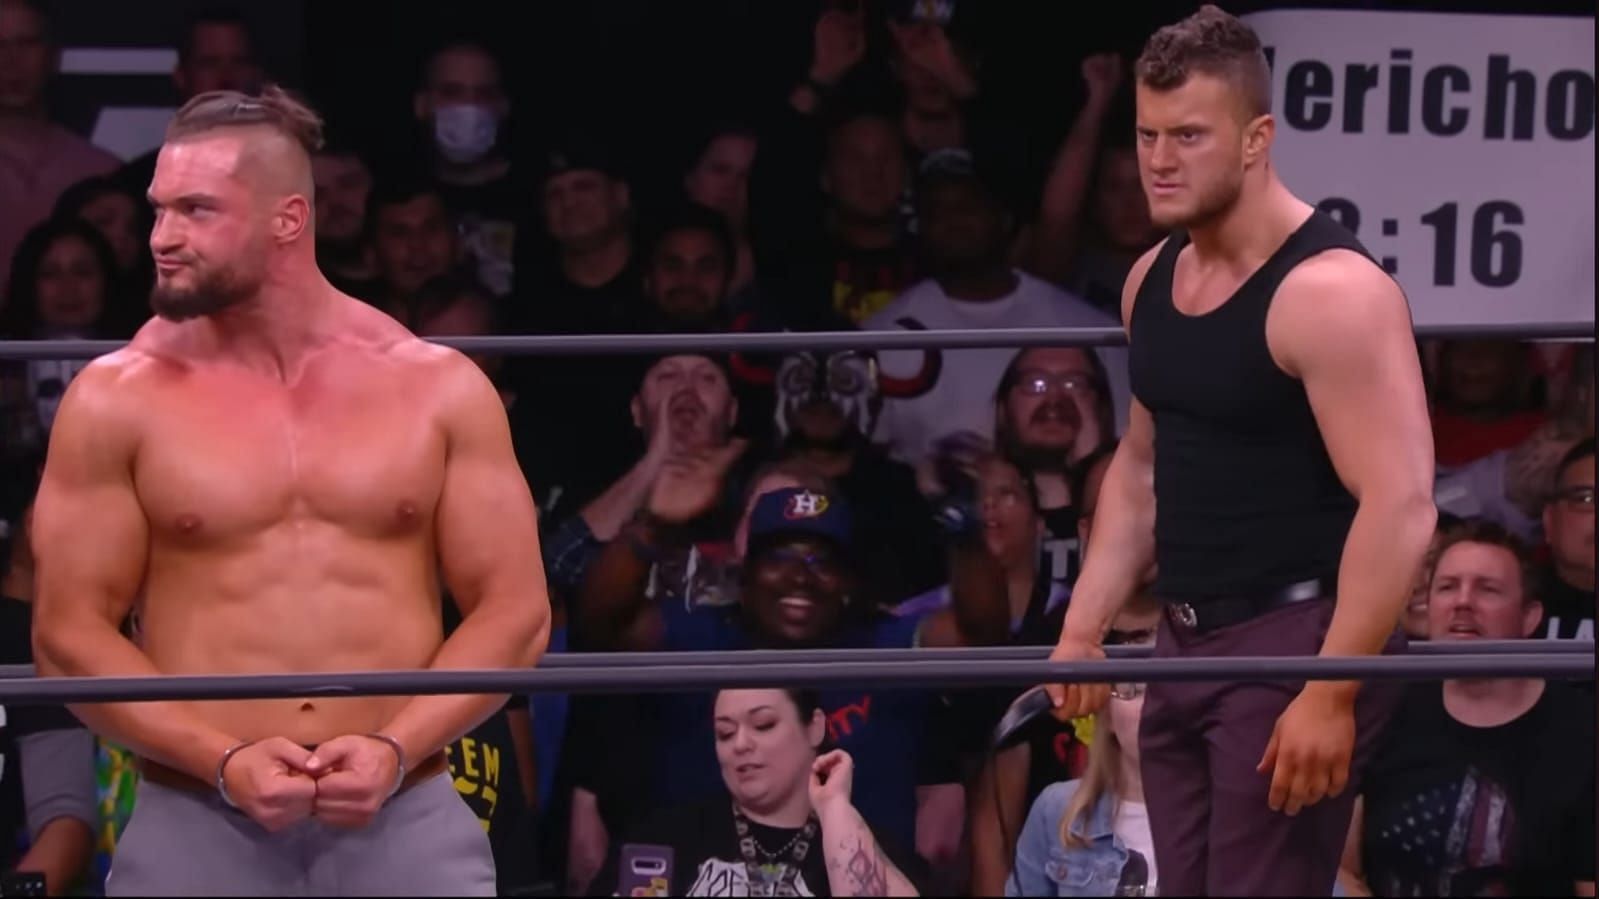 MJF and Wardlow are former rivals